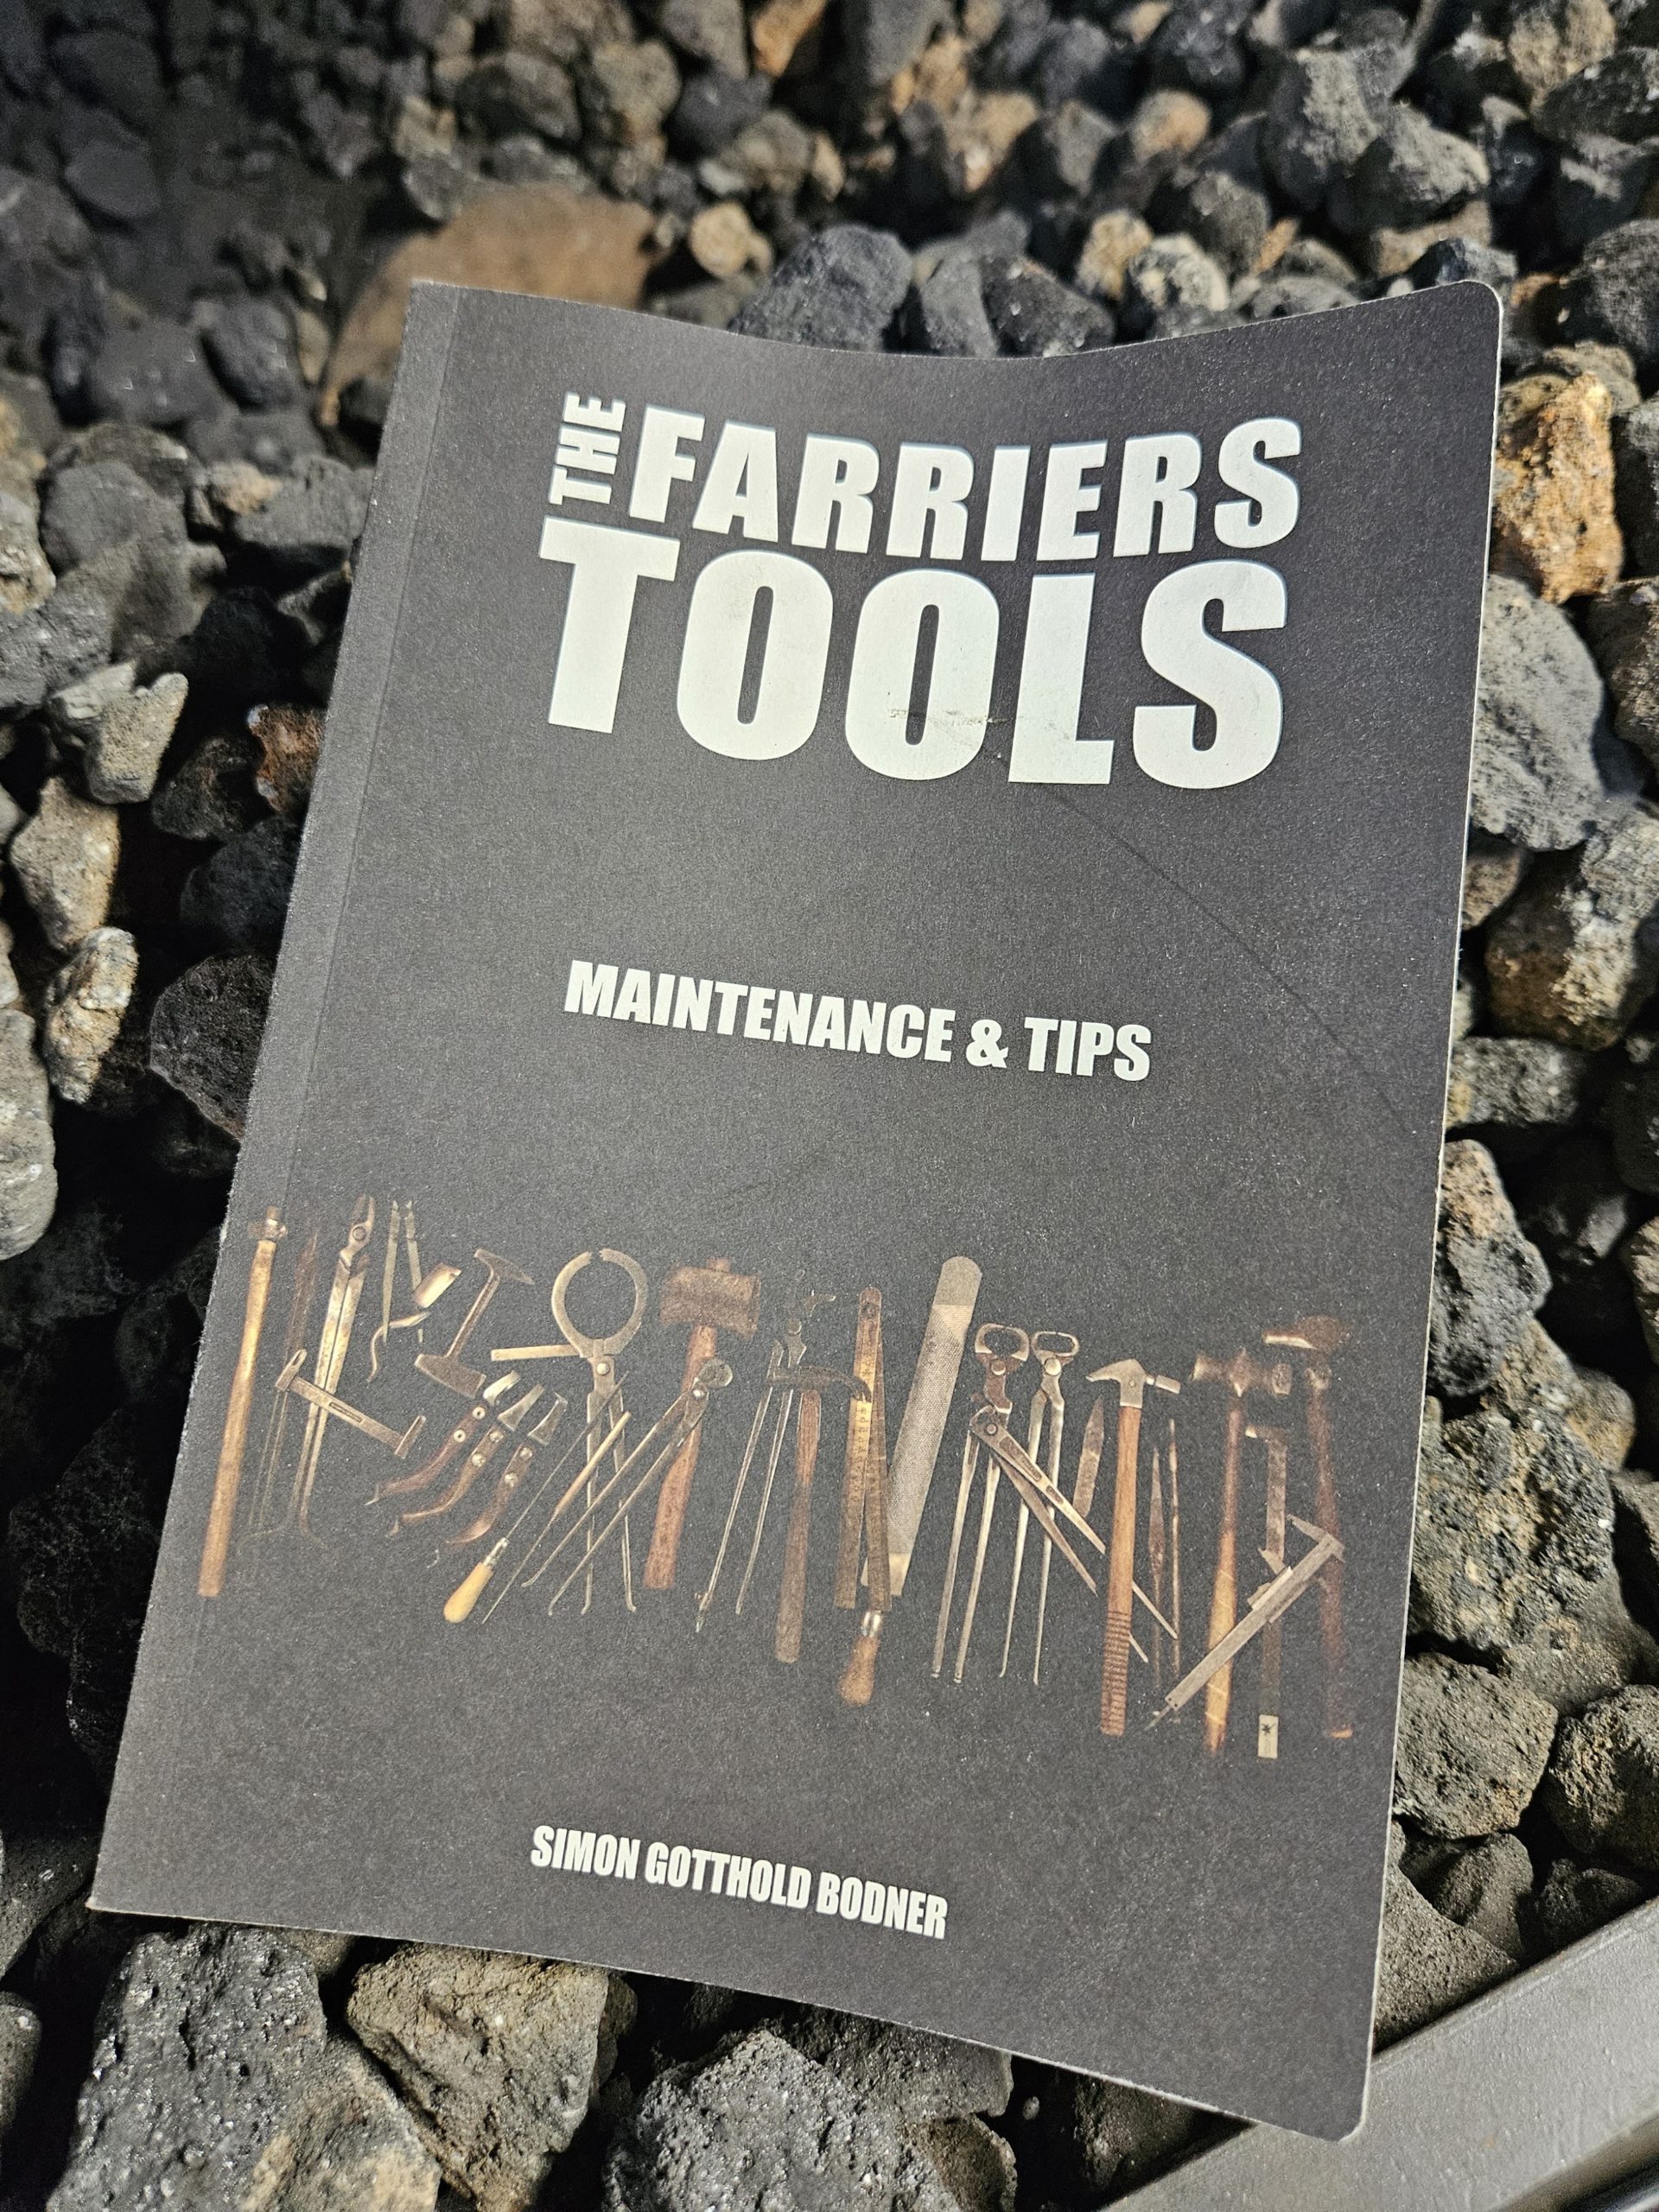 The Farriers Tools